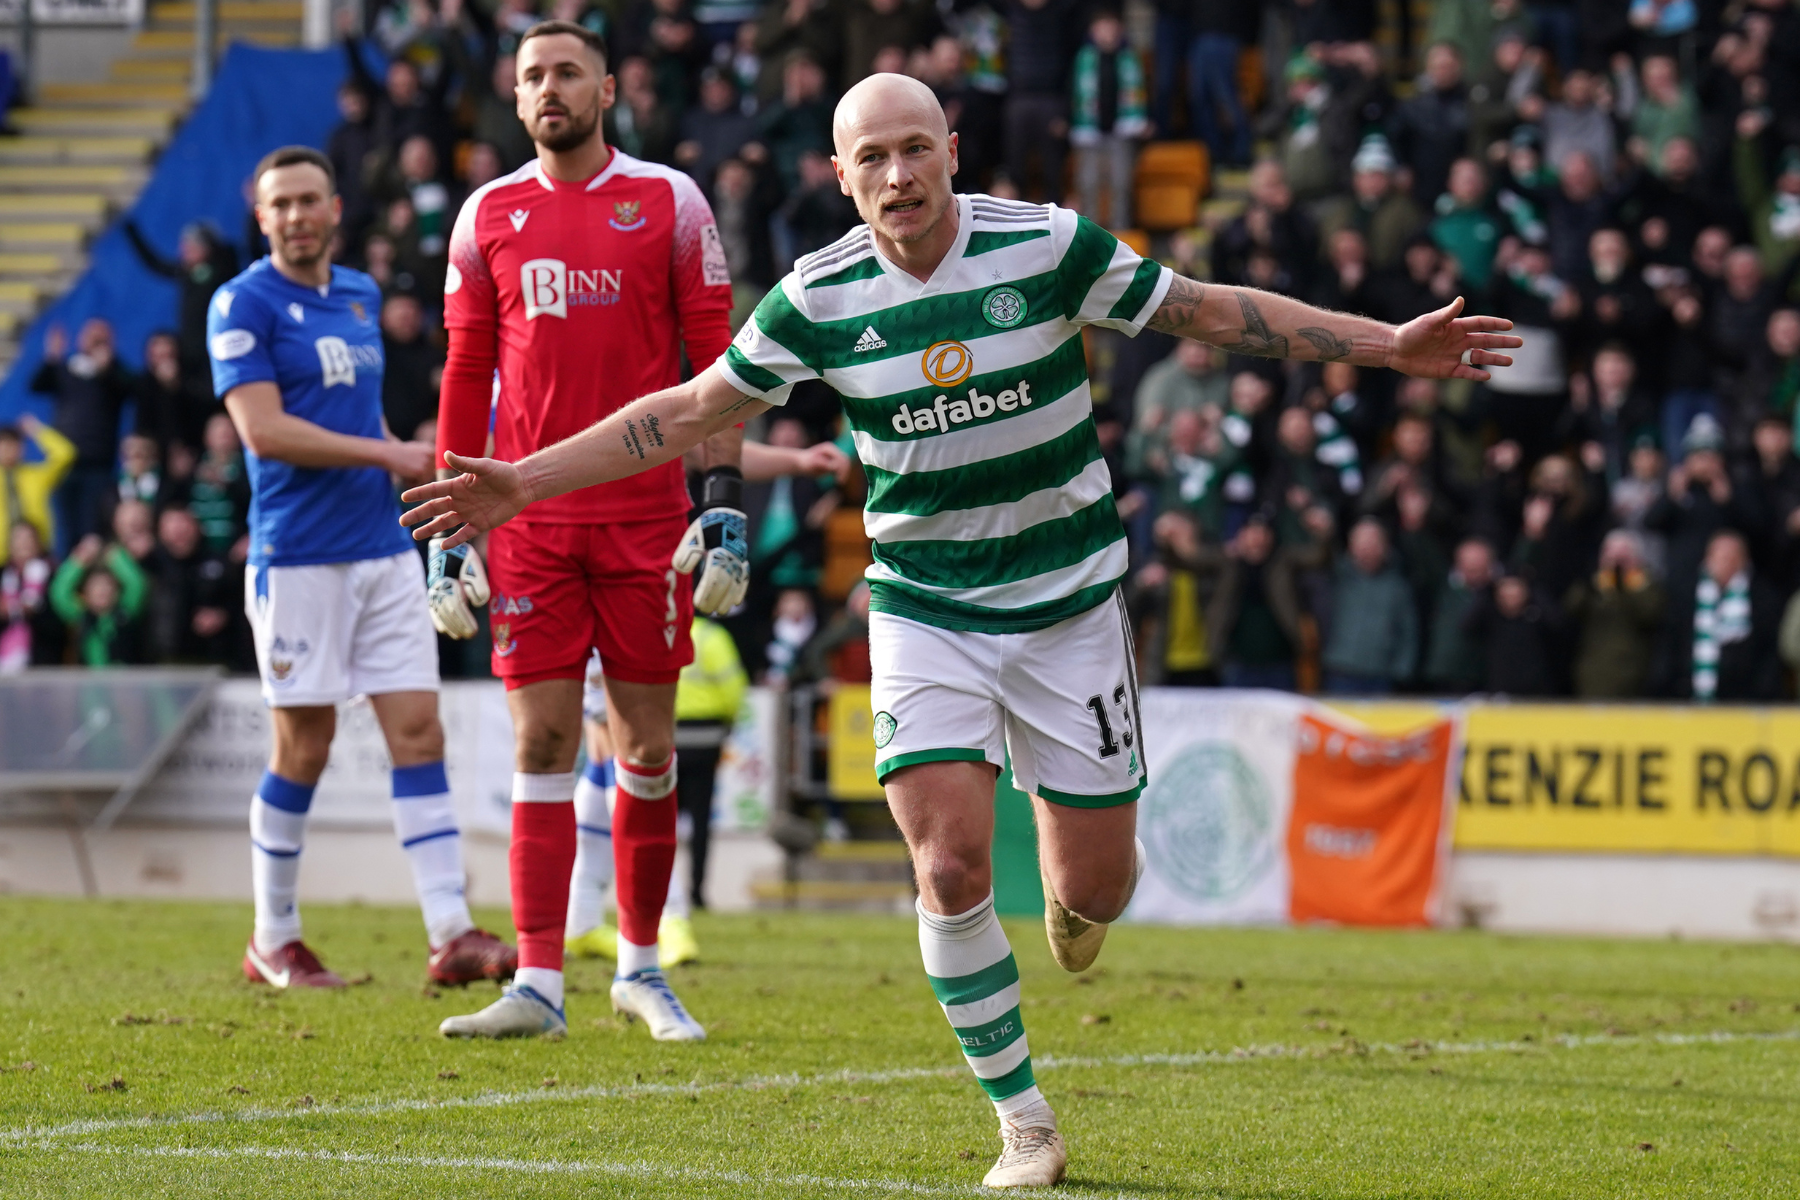 St Johnstone 1 Celtic 4: Instant reaction to the burning issues